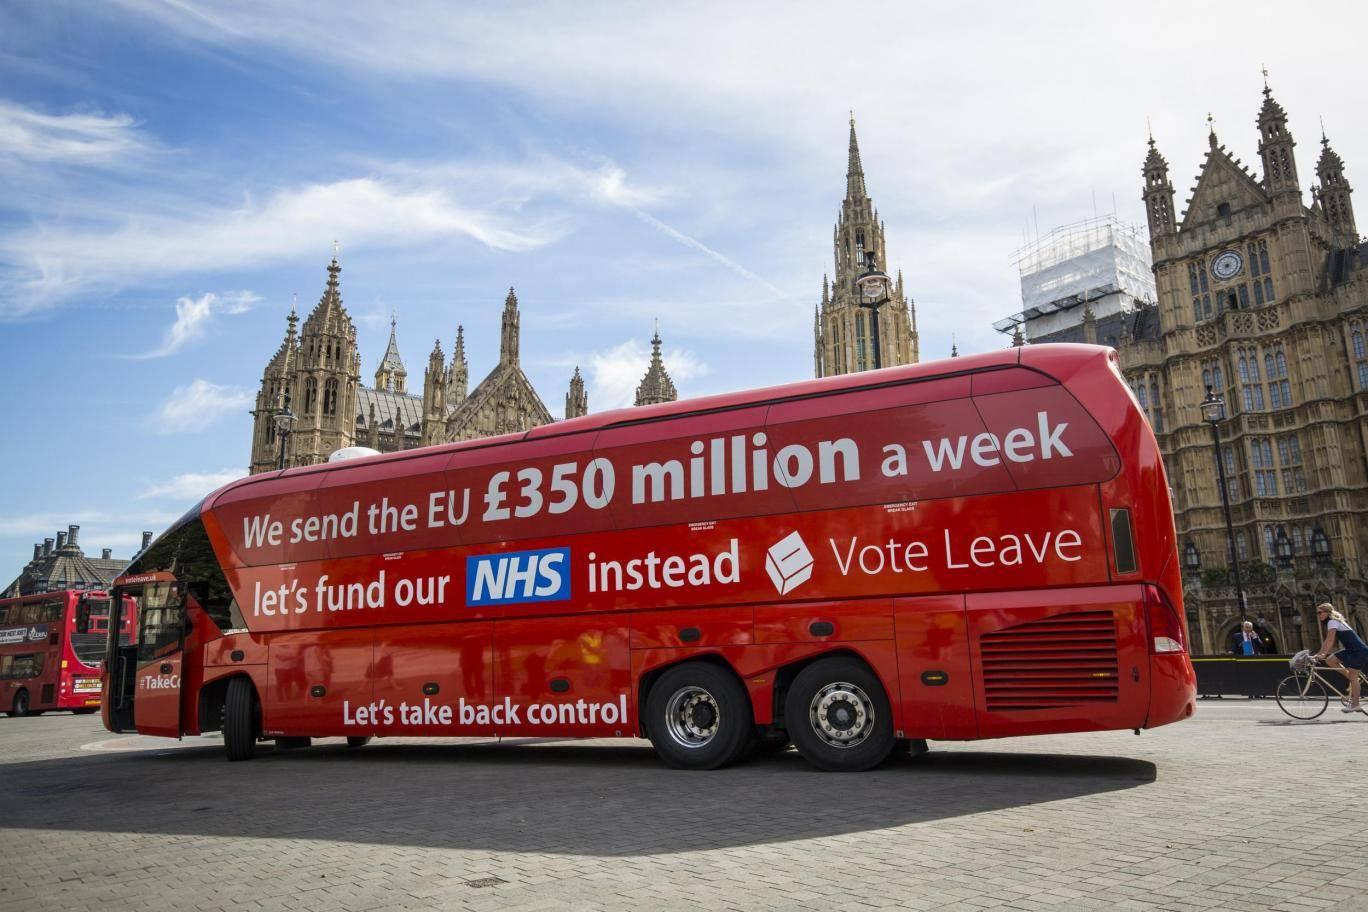 The claim featured on Leave campaign buses